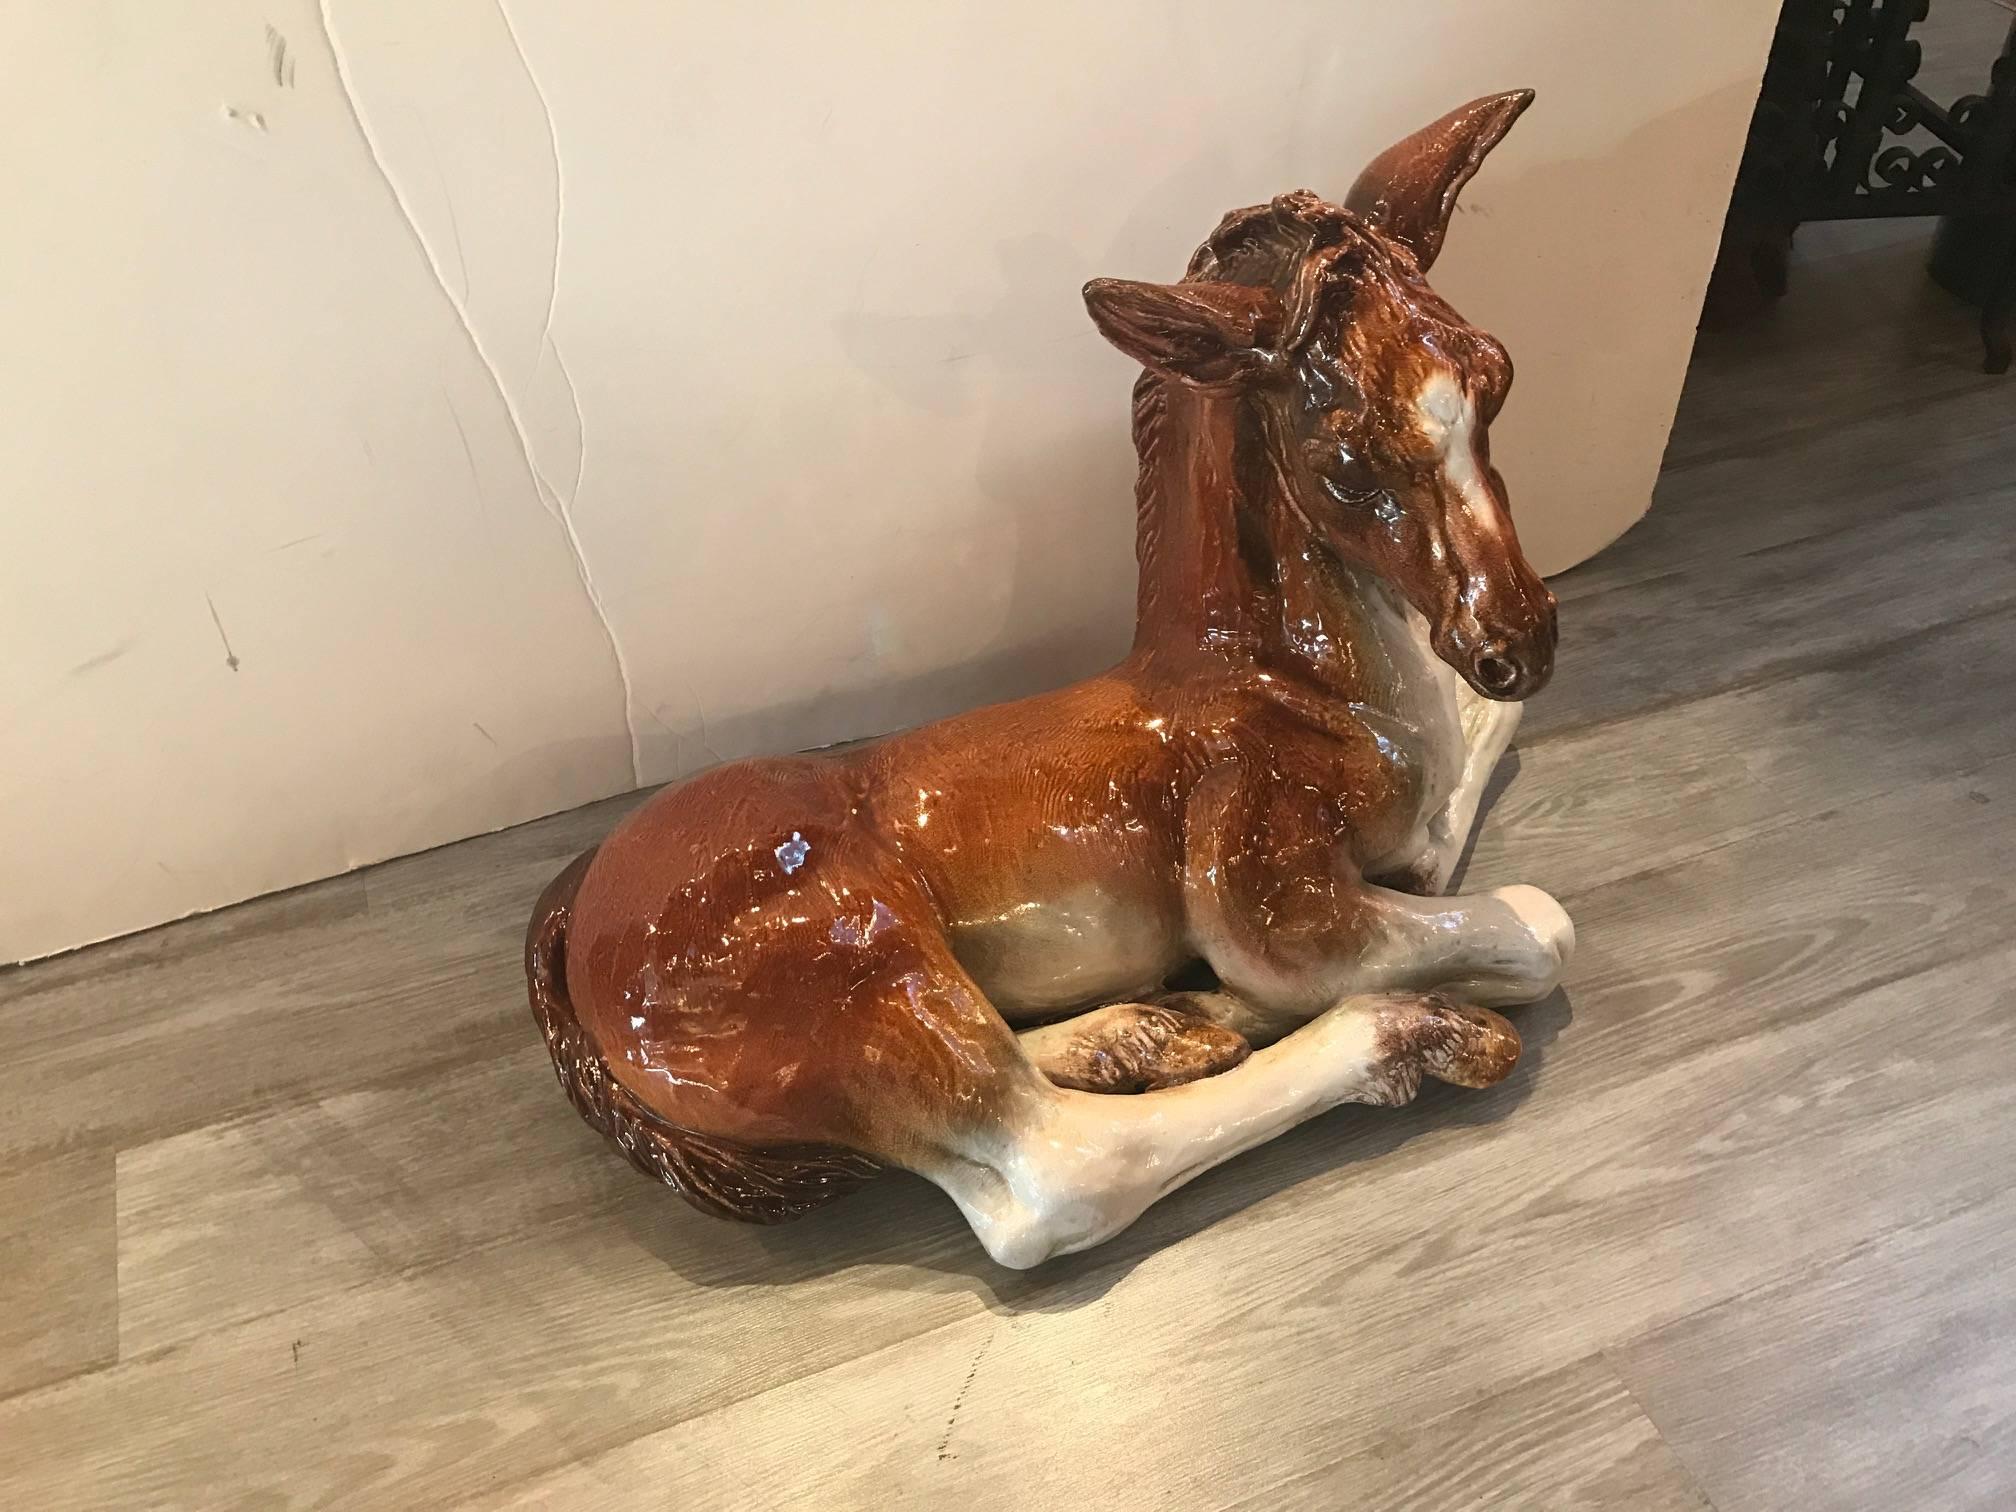 The whimsical sculpture of a young foal marked Italy on the bottom with the name Snaidero, circa 1960.